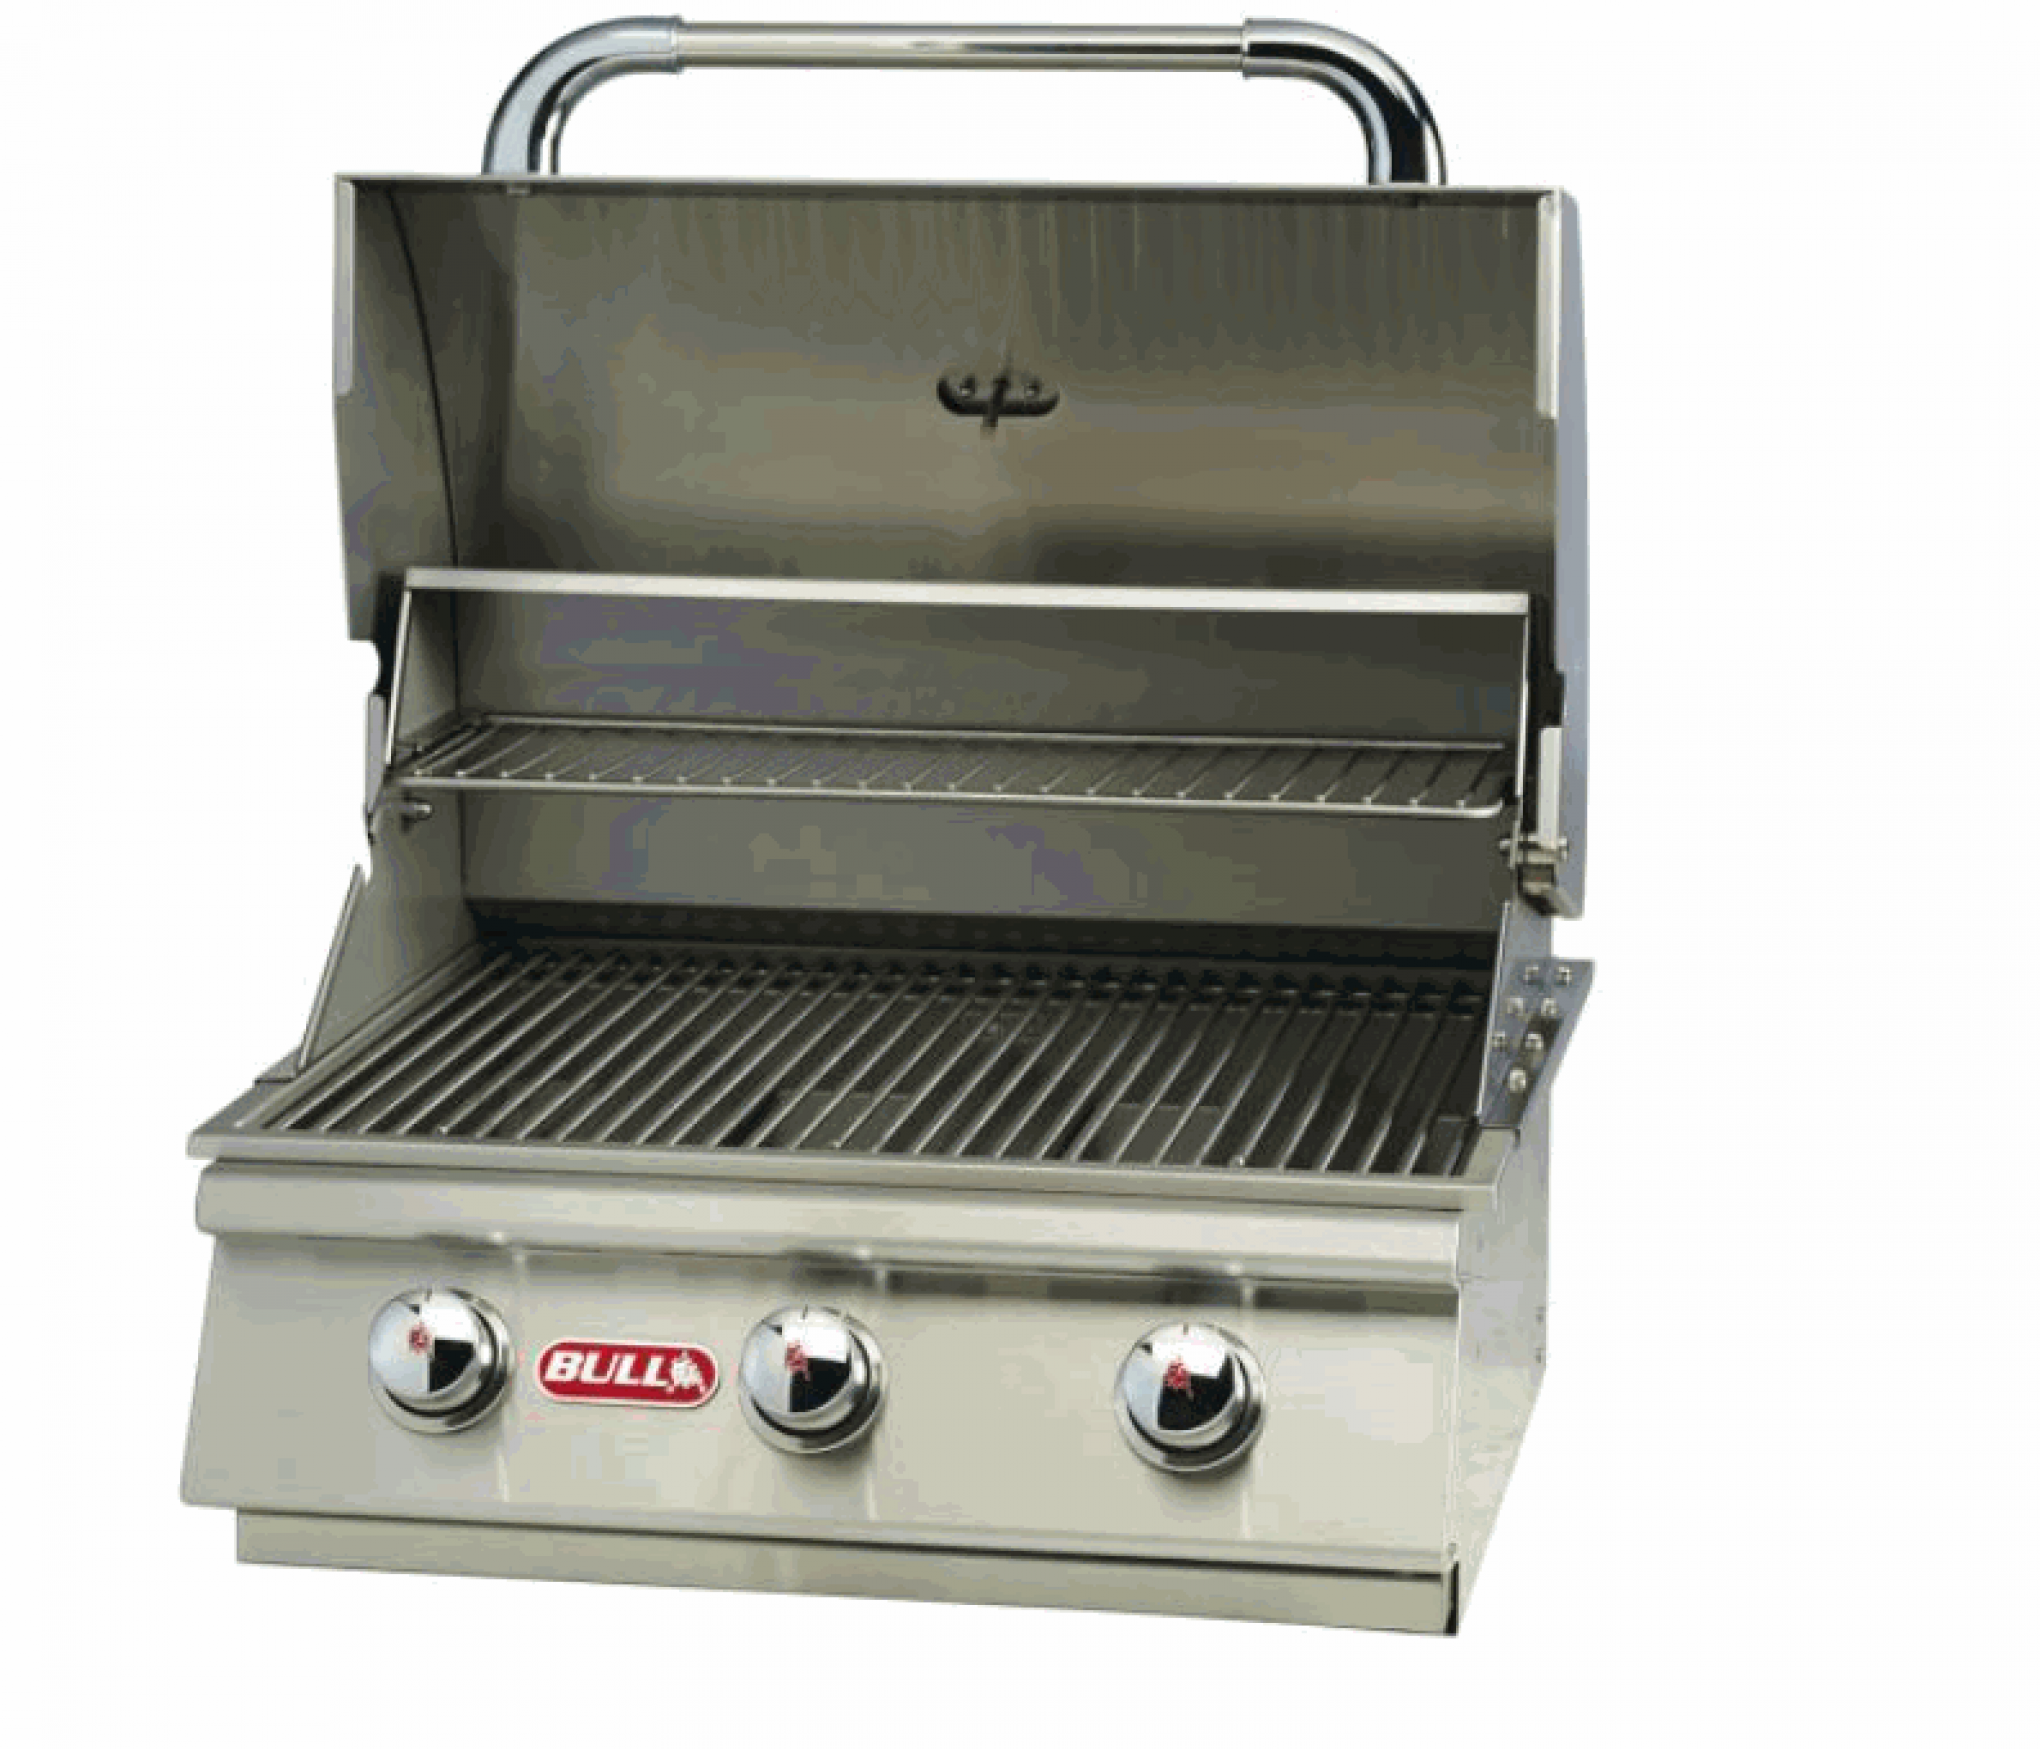 Bull Steer 24" Built-In Natural Gas Grill Head for Outdoor Kitchen 